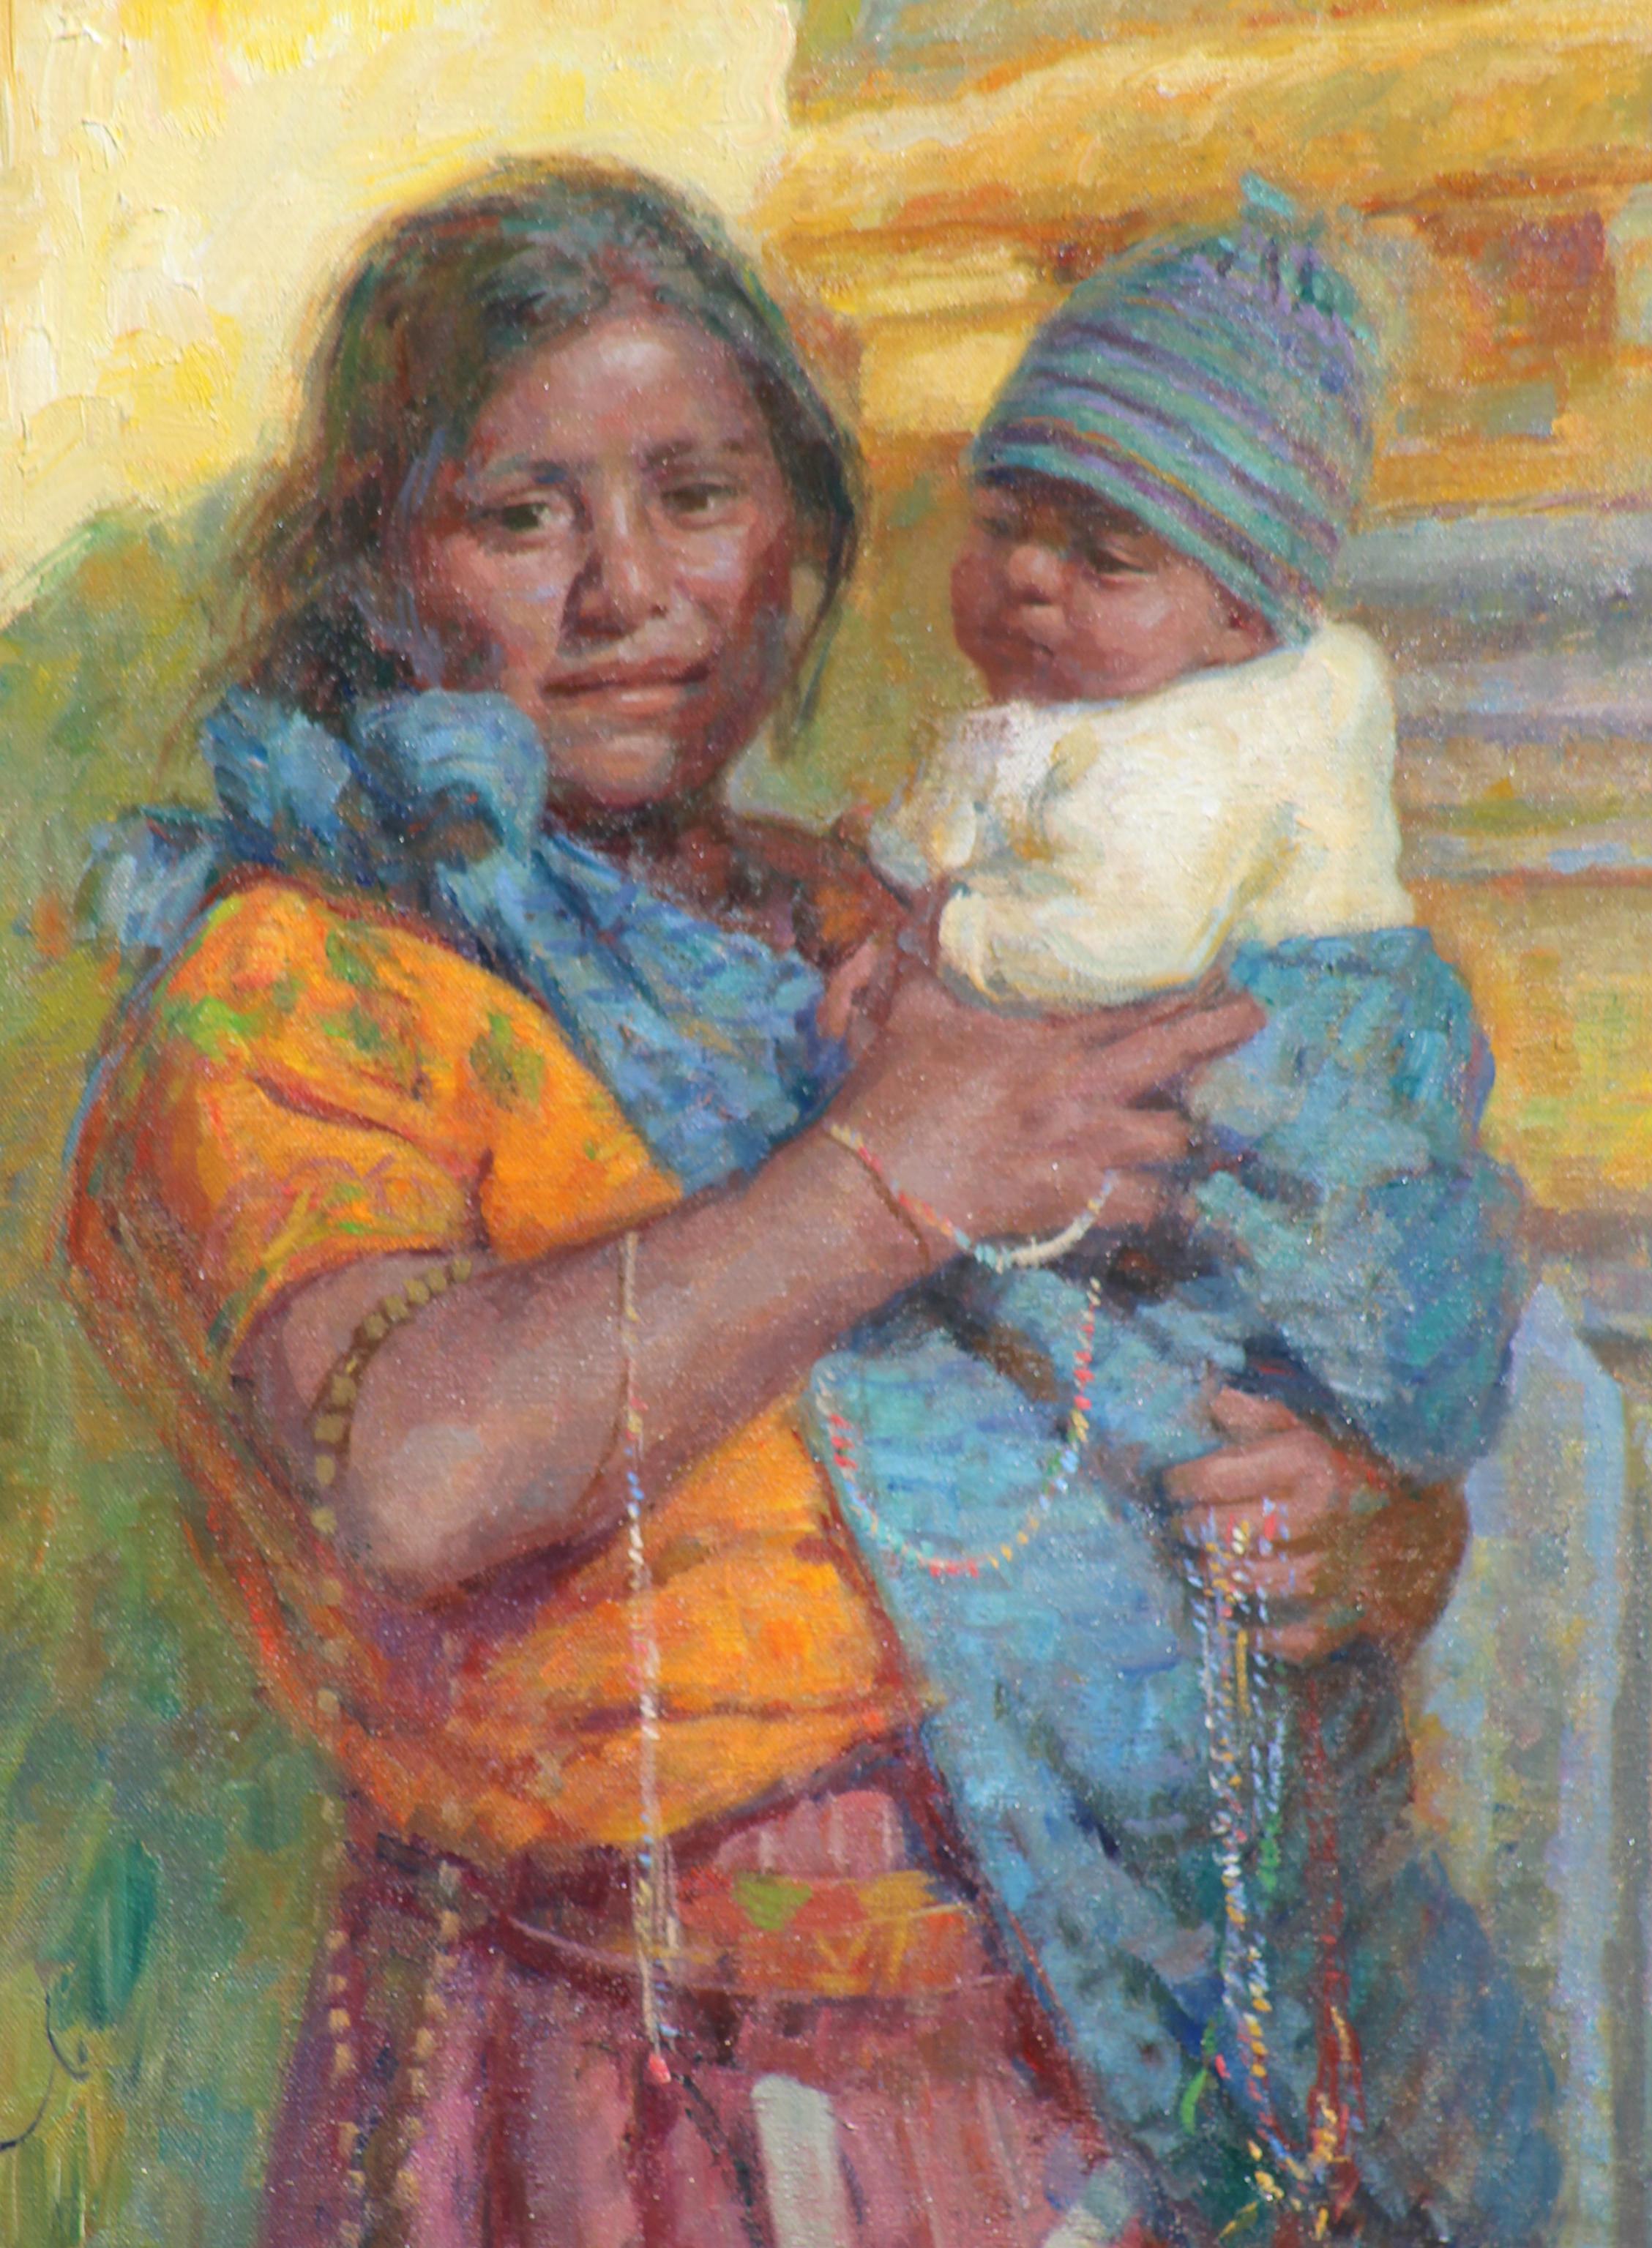 Santa Maria de Jesus, Mujer con Bebe, Guatemalan Mother and Baby, Texas Artist,  - Painting by William Kalwick